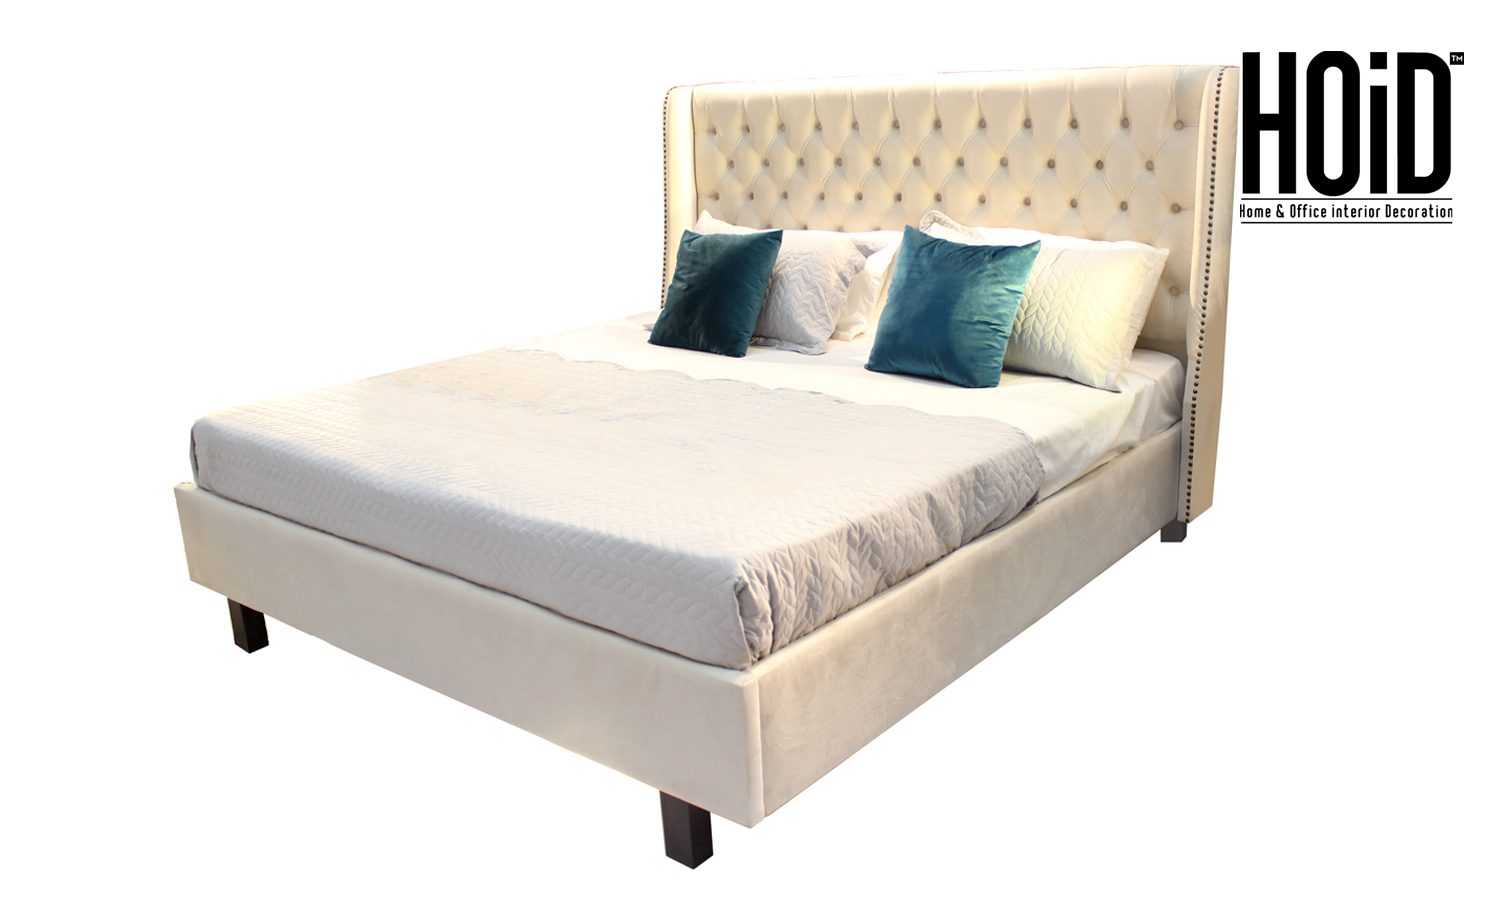 snow-tufted-bed-01-1.jpg